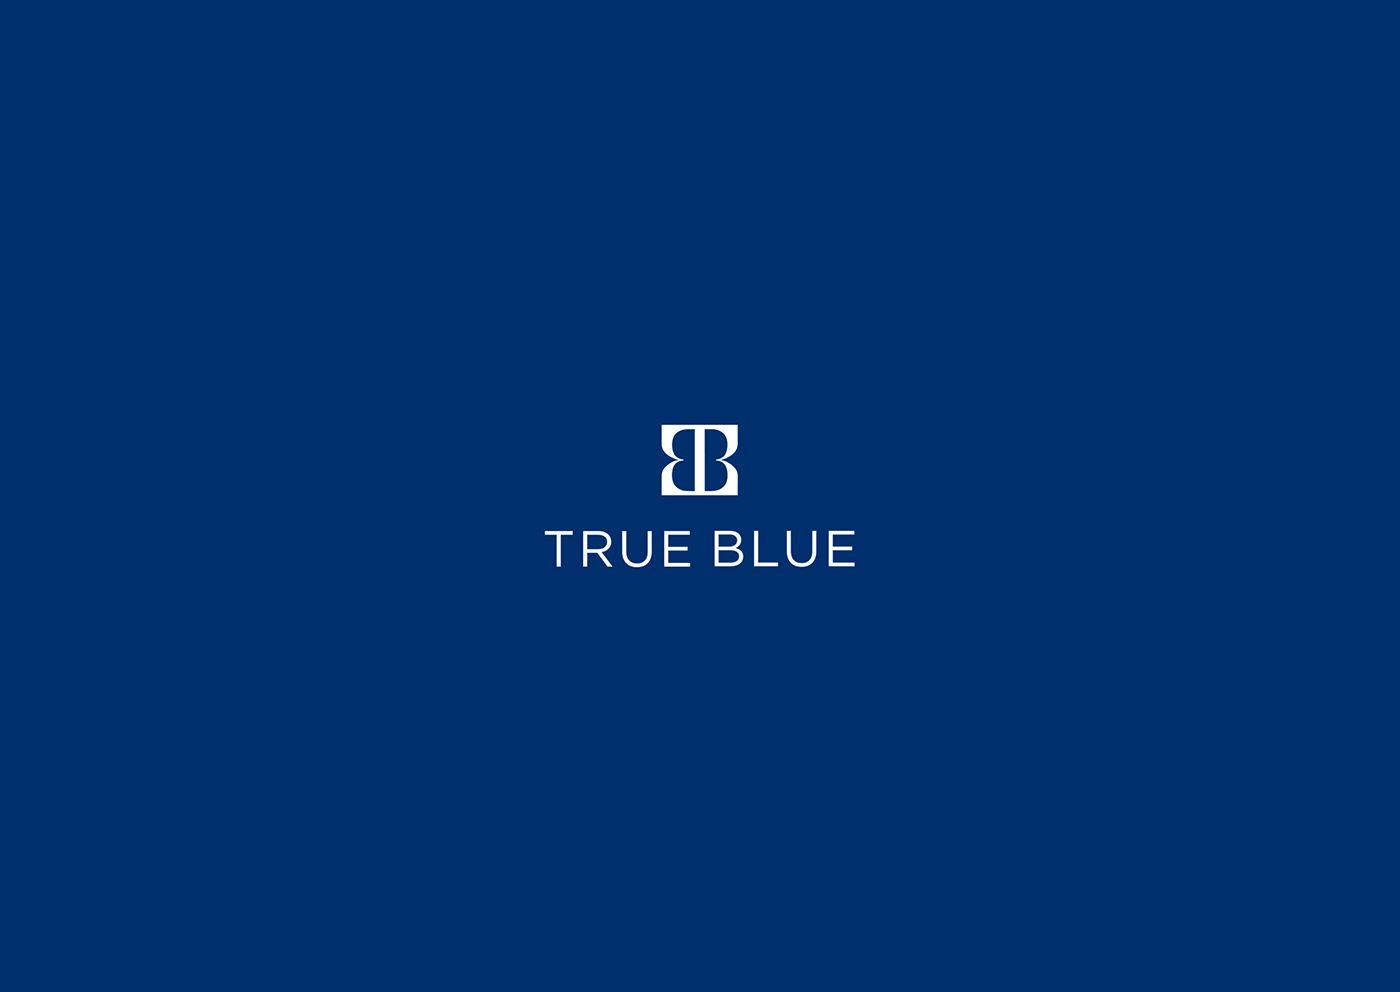 Blue Fashion Logo - TRUE BLUE / Branding and Retail store graphics on Behance